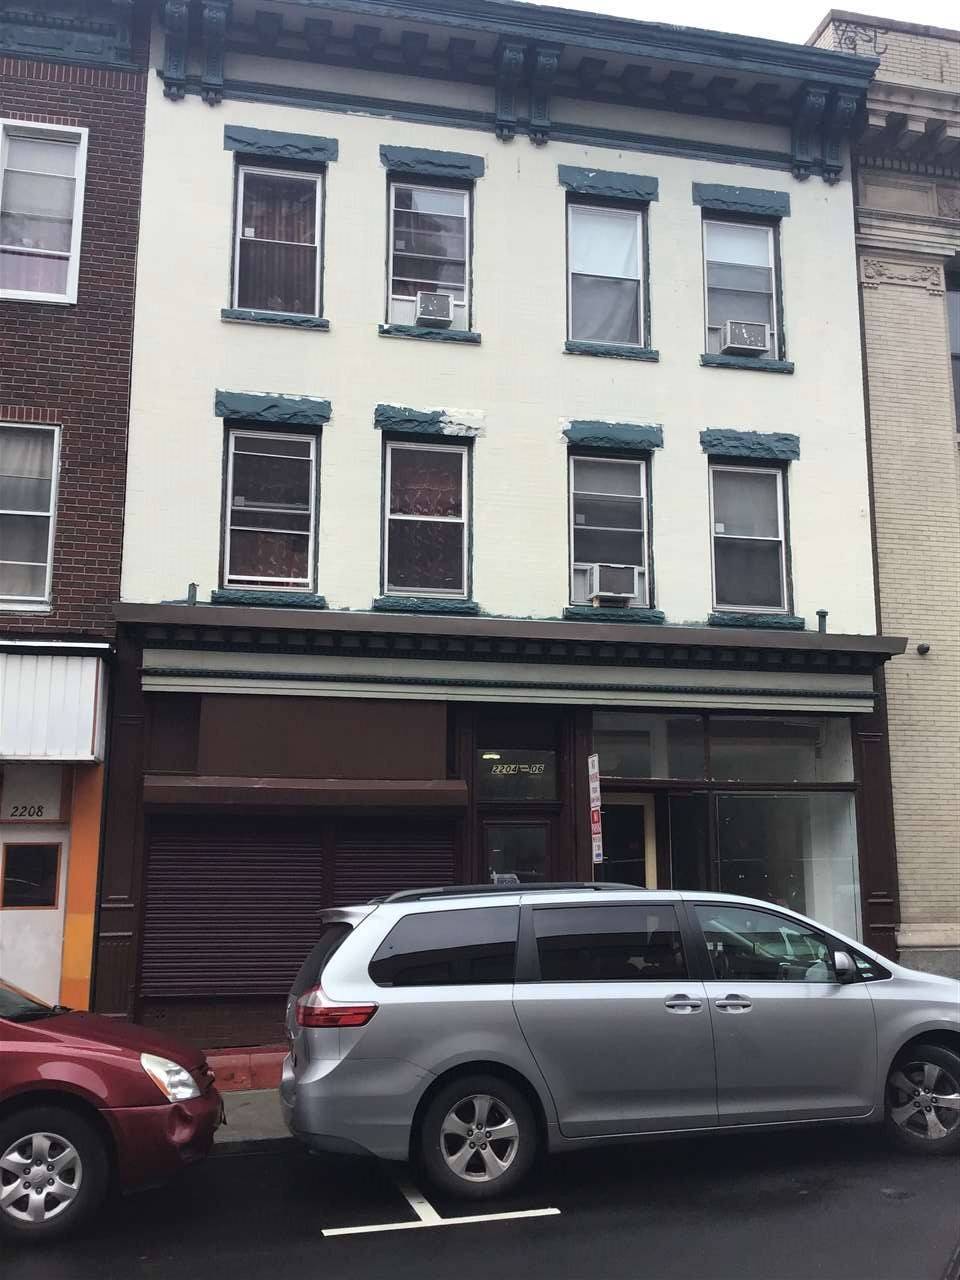 2204-2206 BERGENLINE AVE New Jersey